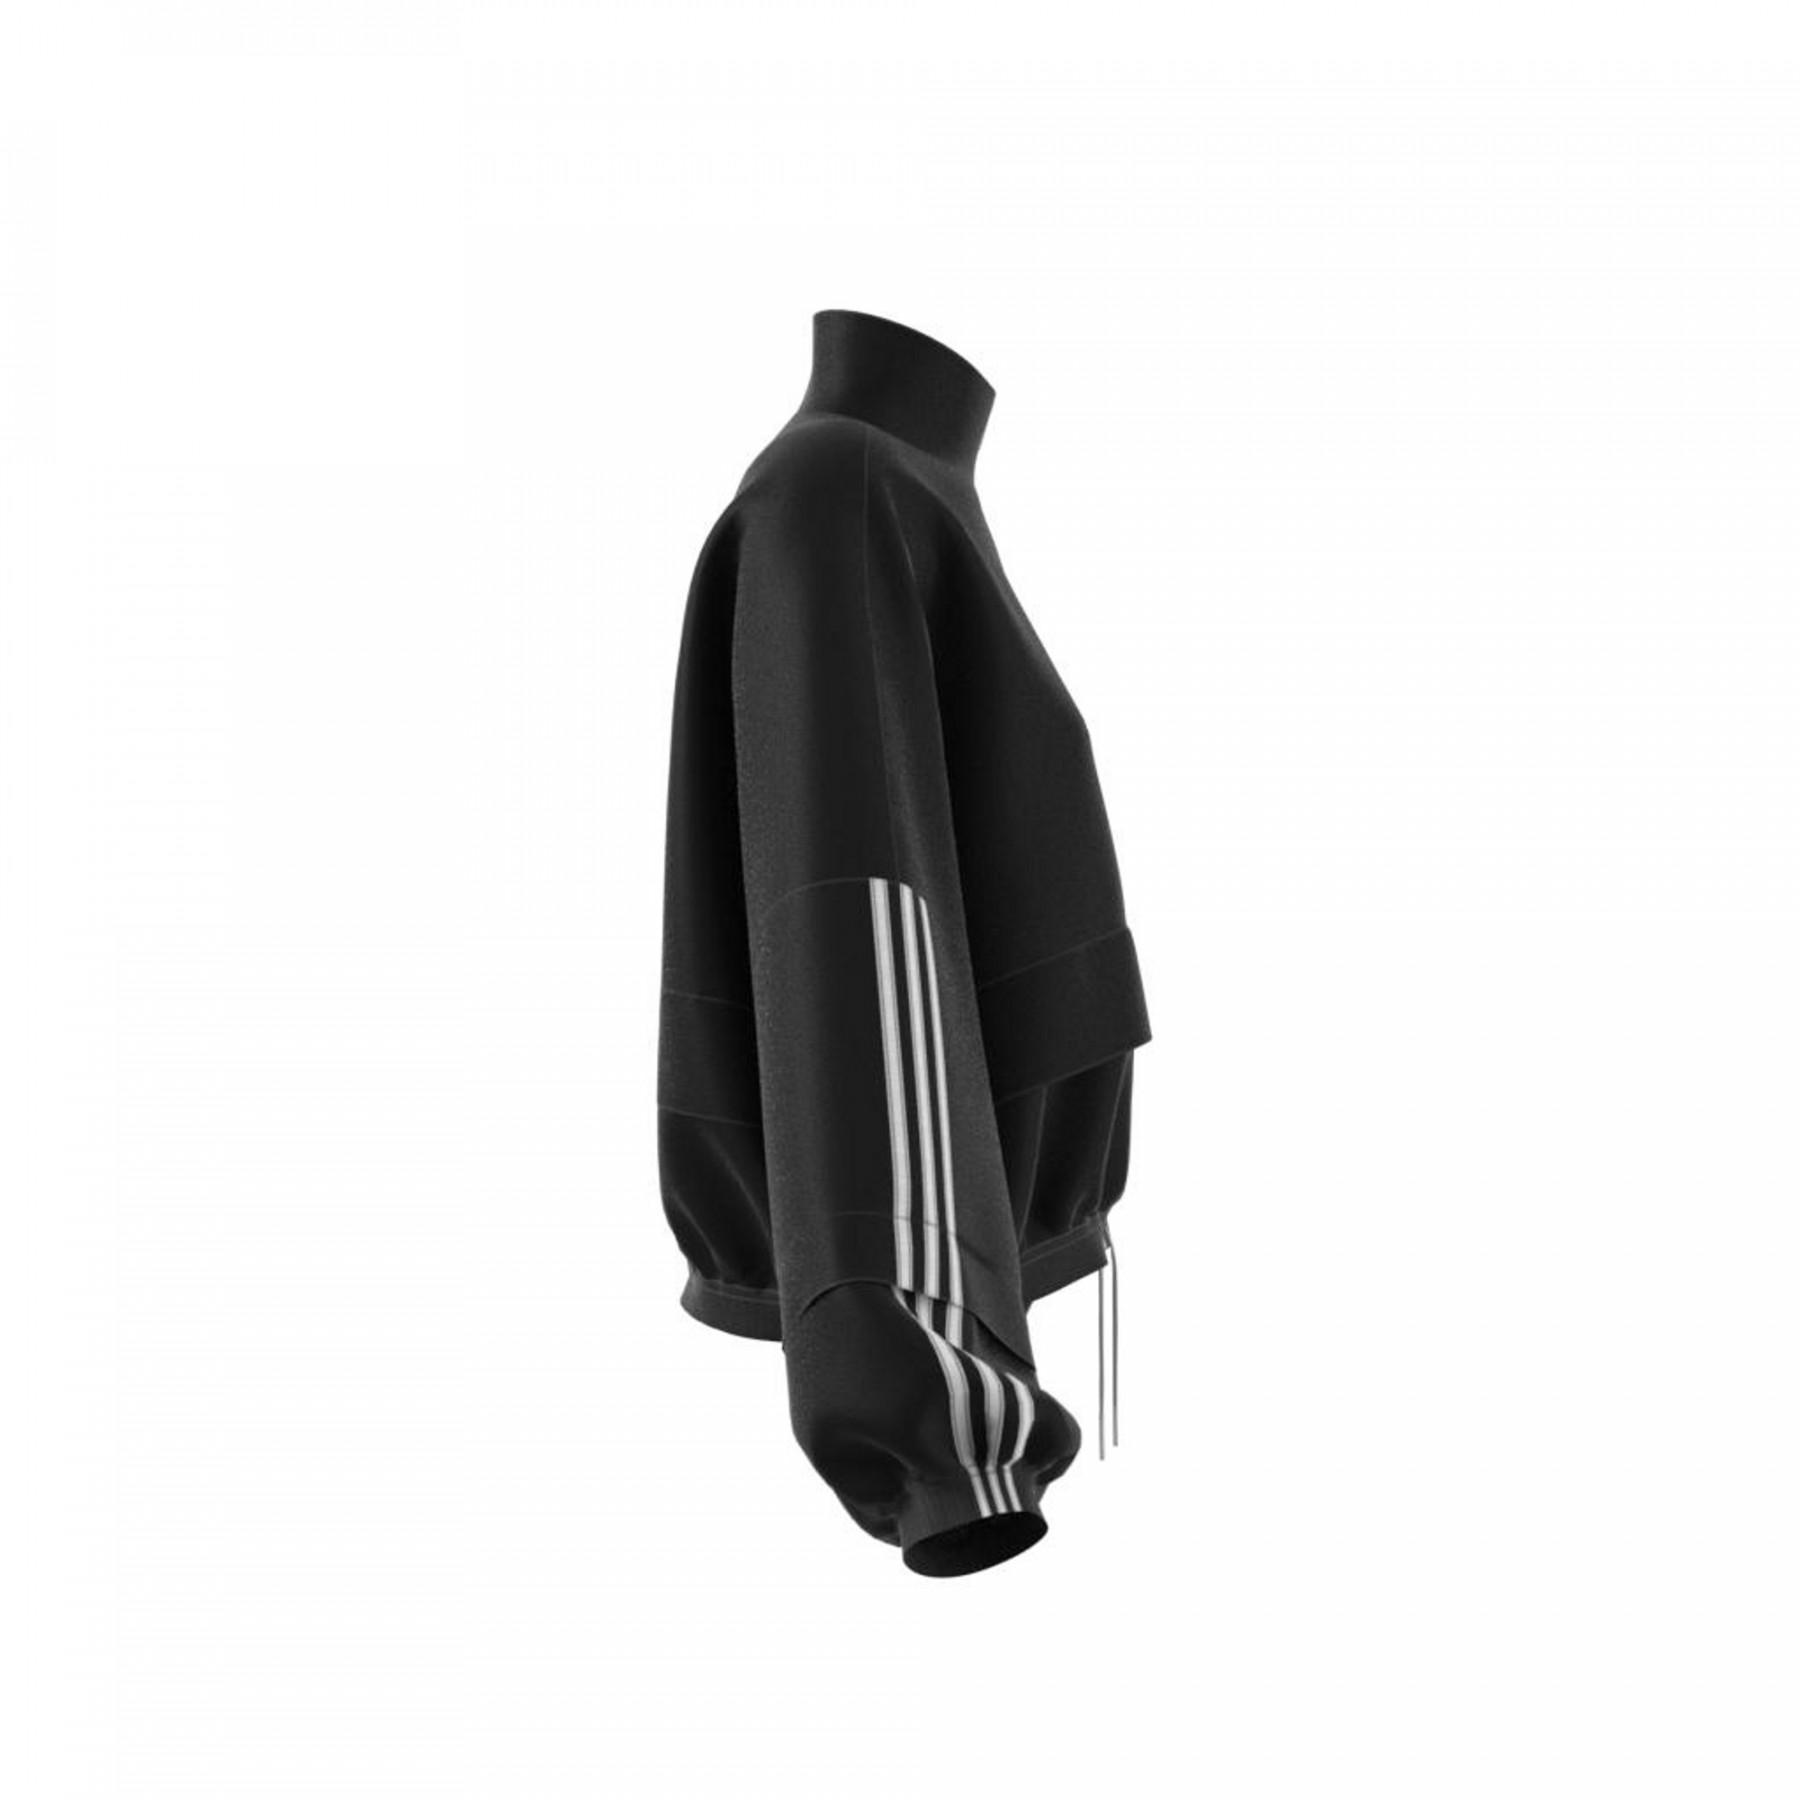 Chaqueta de mujer adidas Packable Woven Track